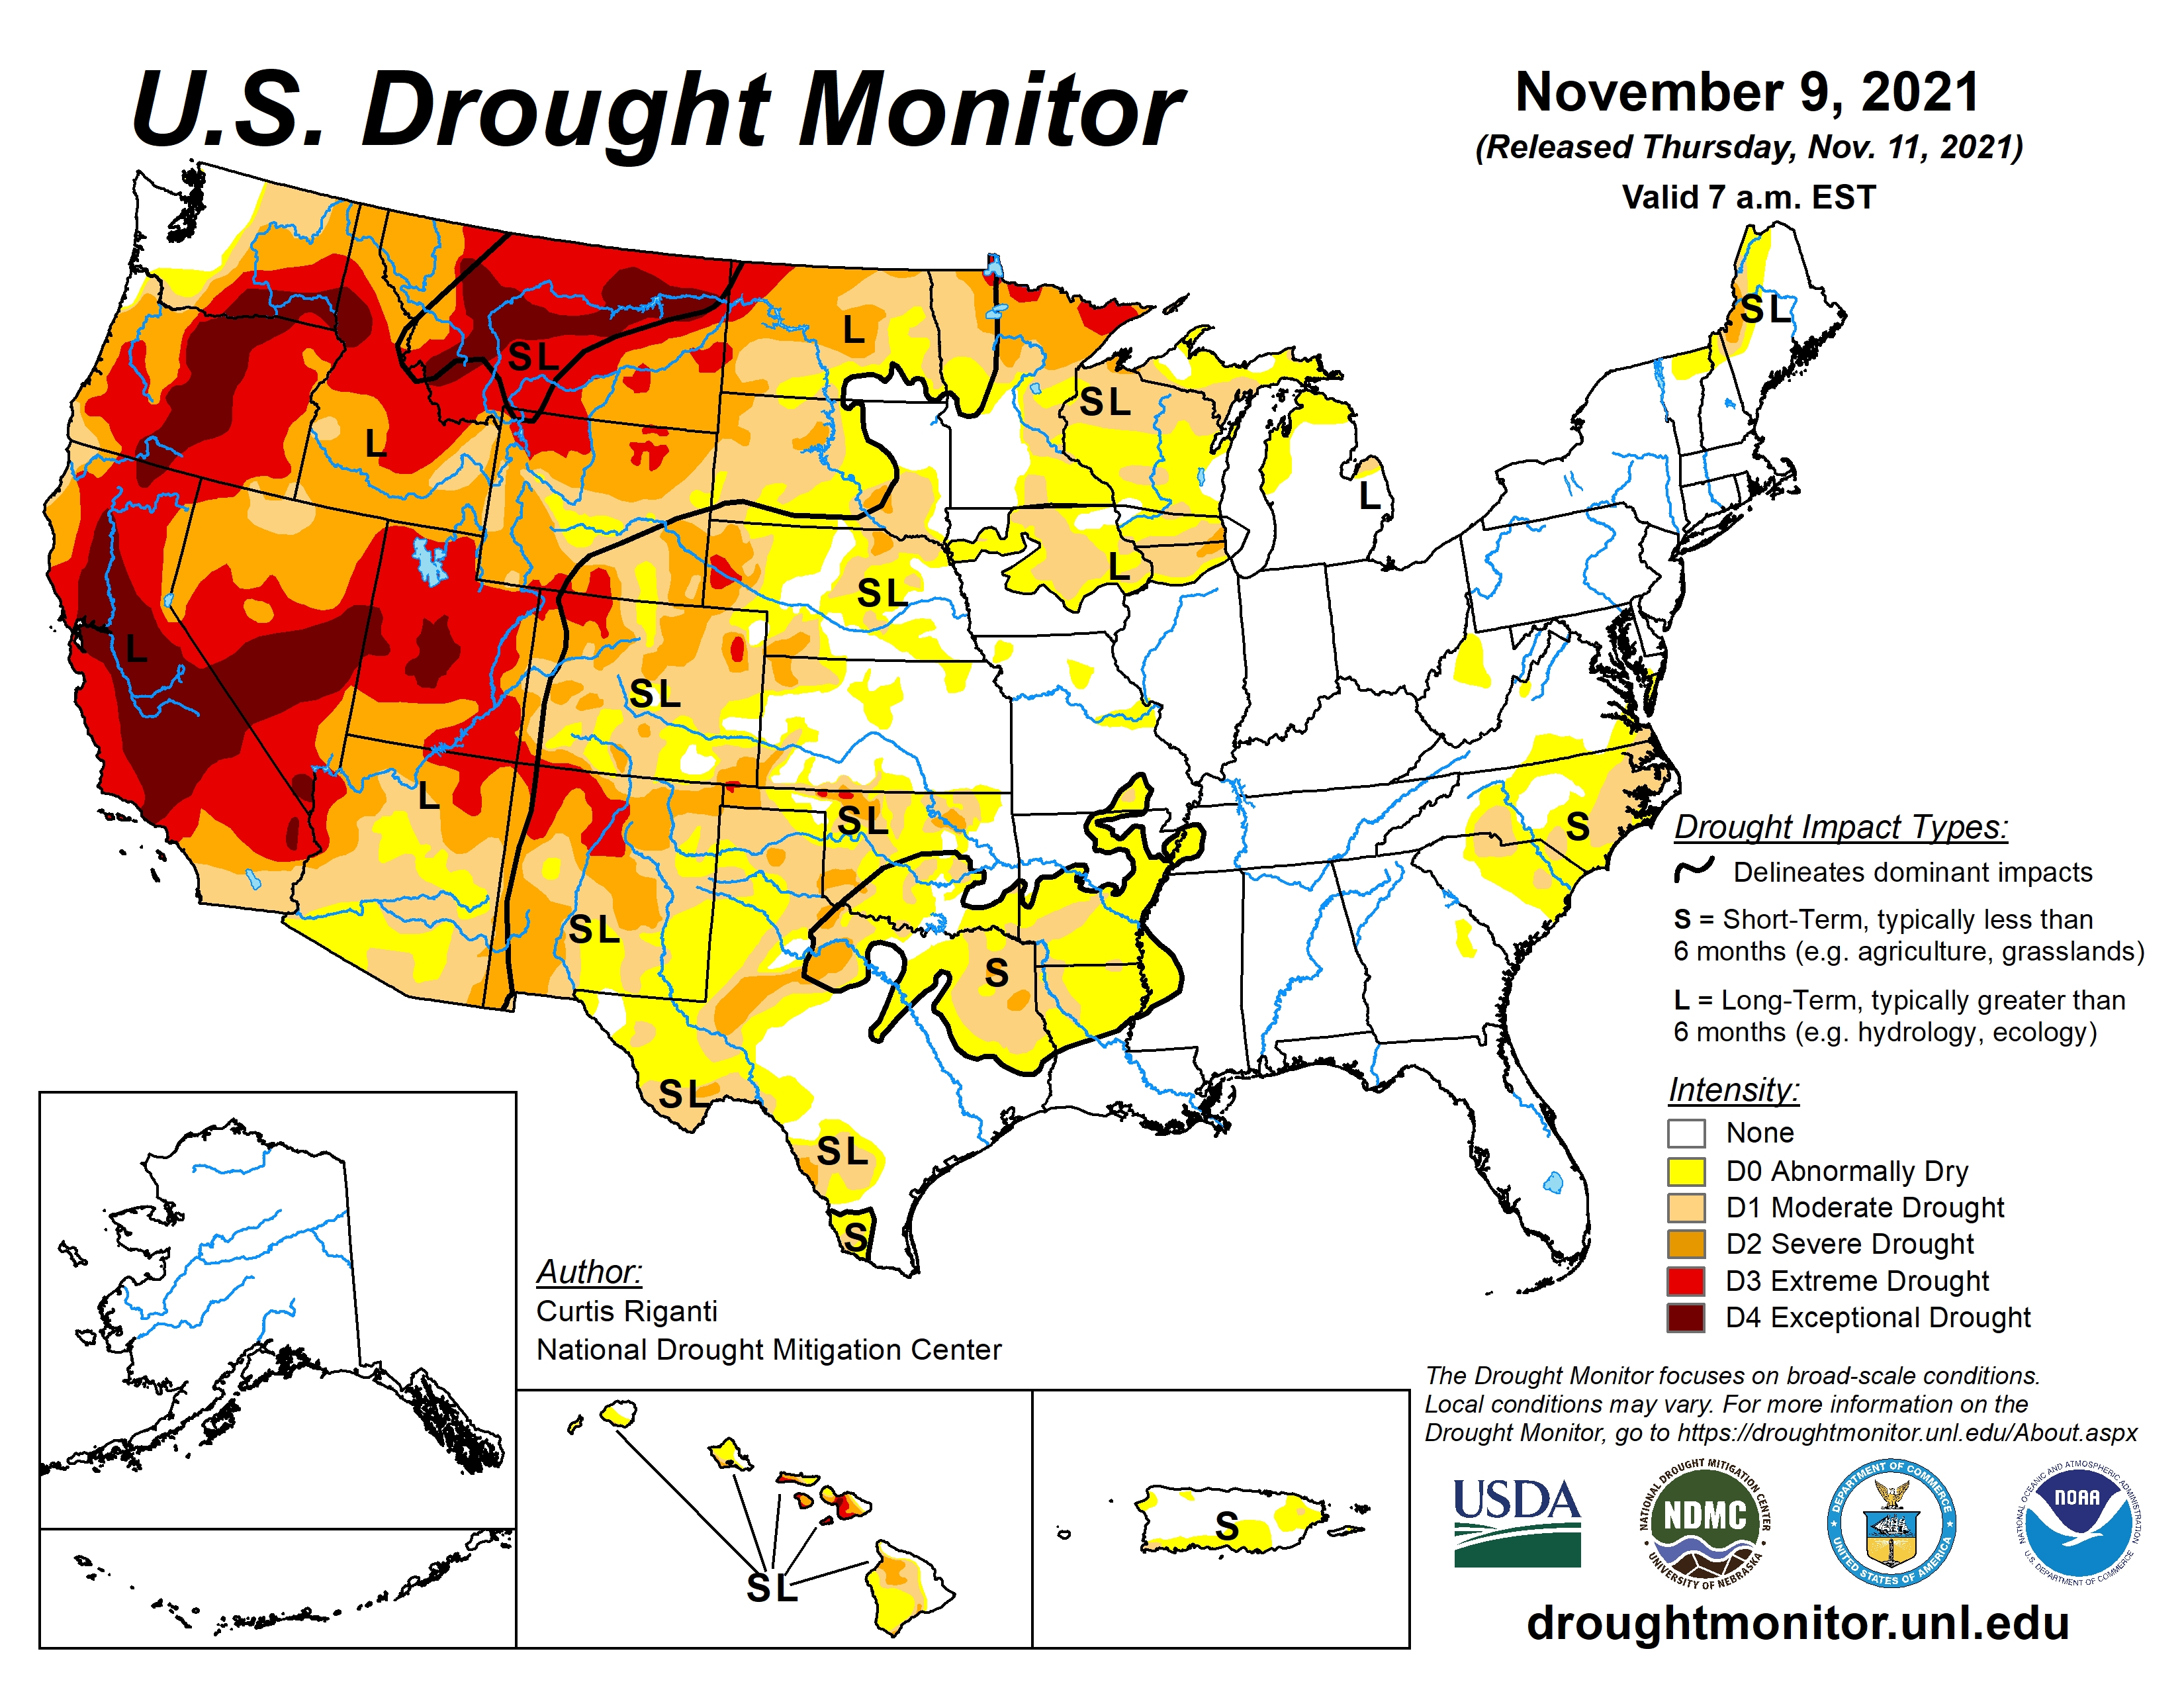 Oklahoma's Drought Monitor Readings Improve Marginally in Latest Weekly Report